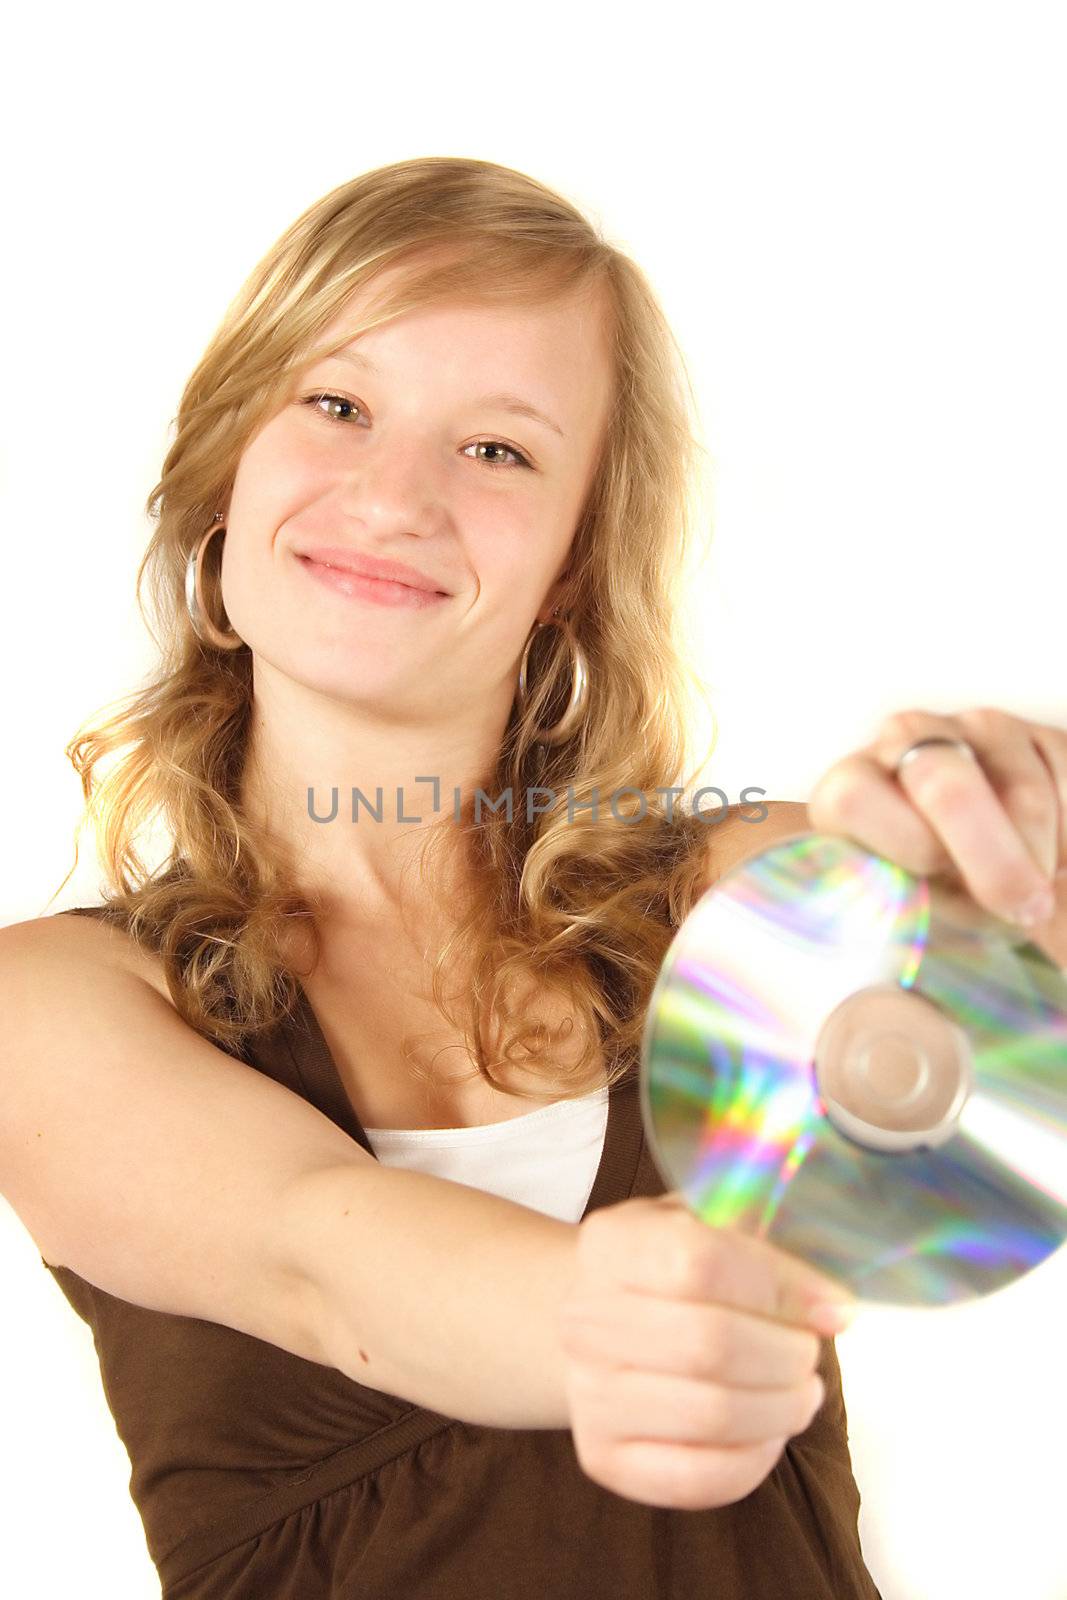 A young attractive girl smiling and holding a cd or dvd. All isolated on white background.